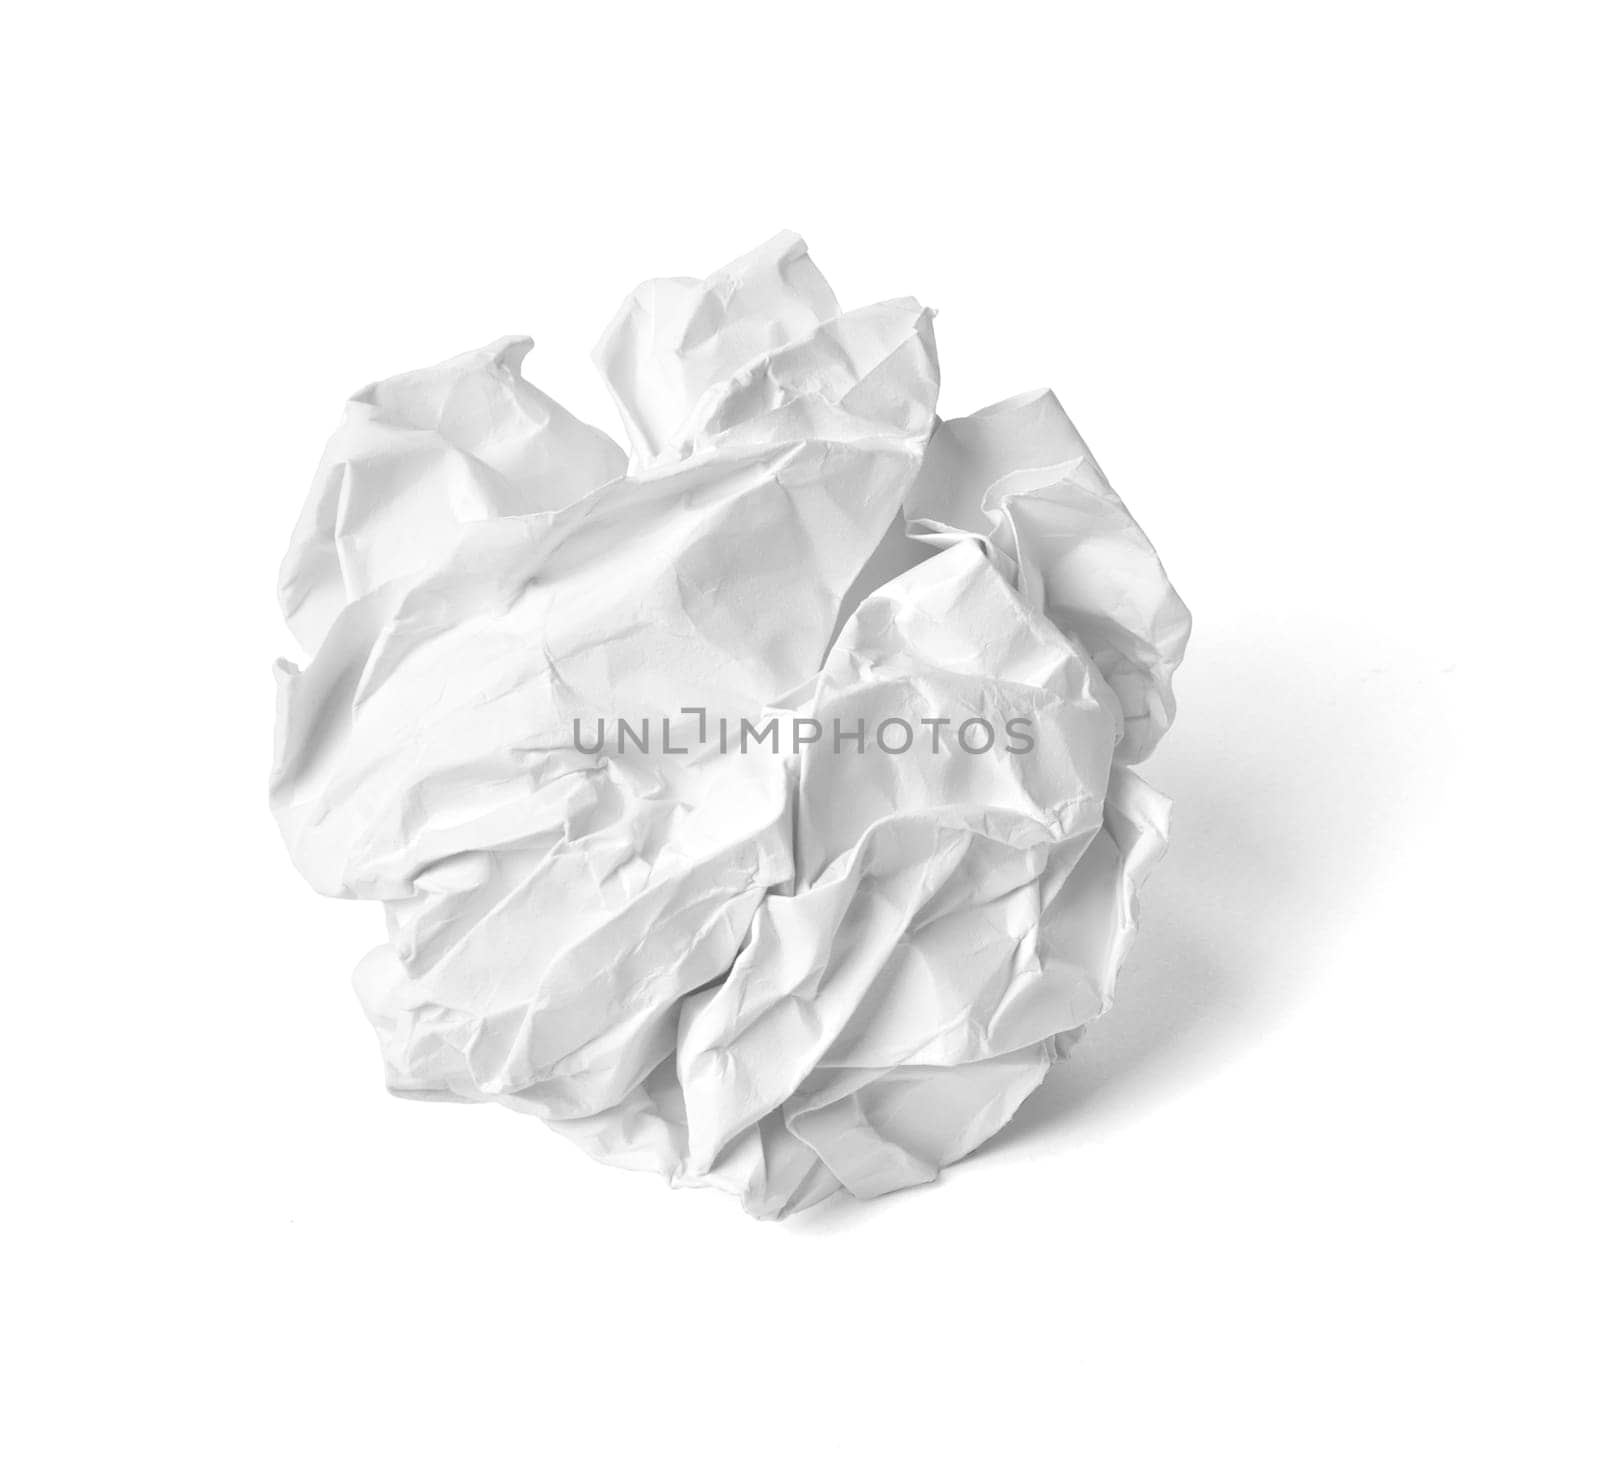 paper ball crumpled garbage trash mistake by Picsfive